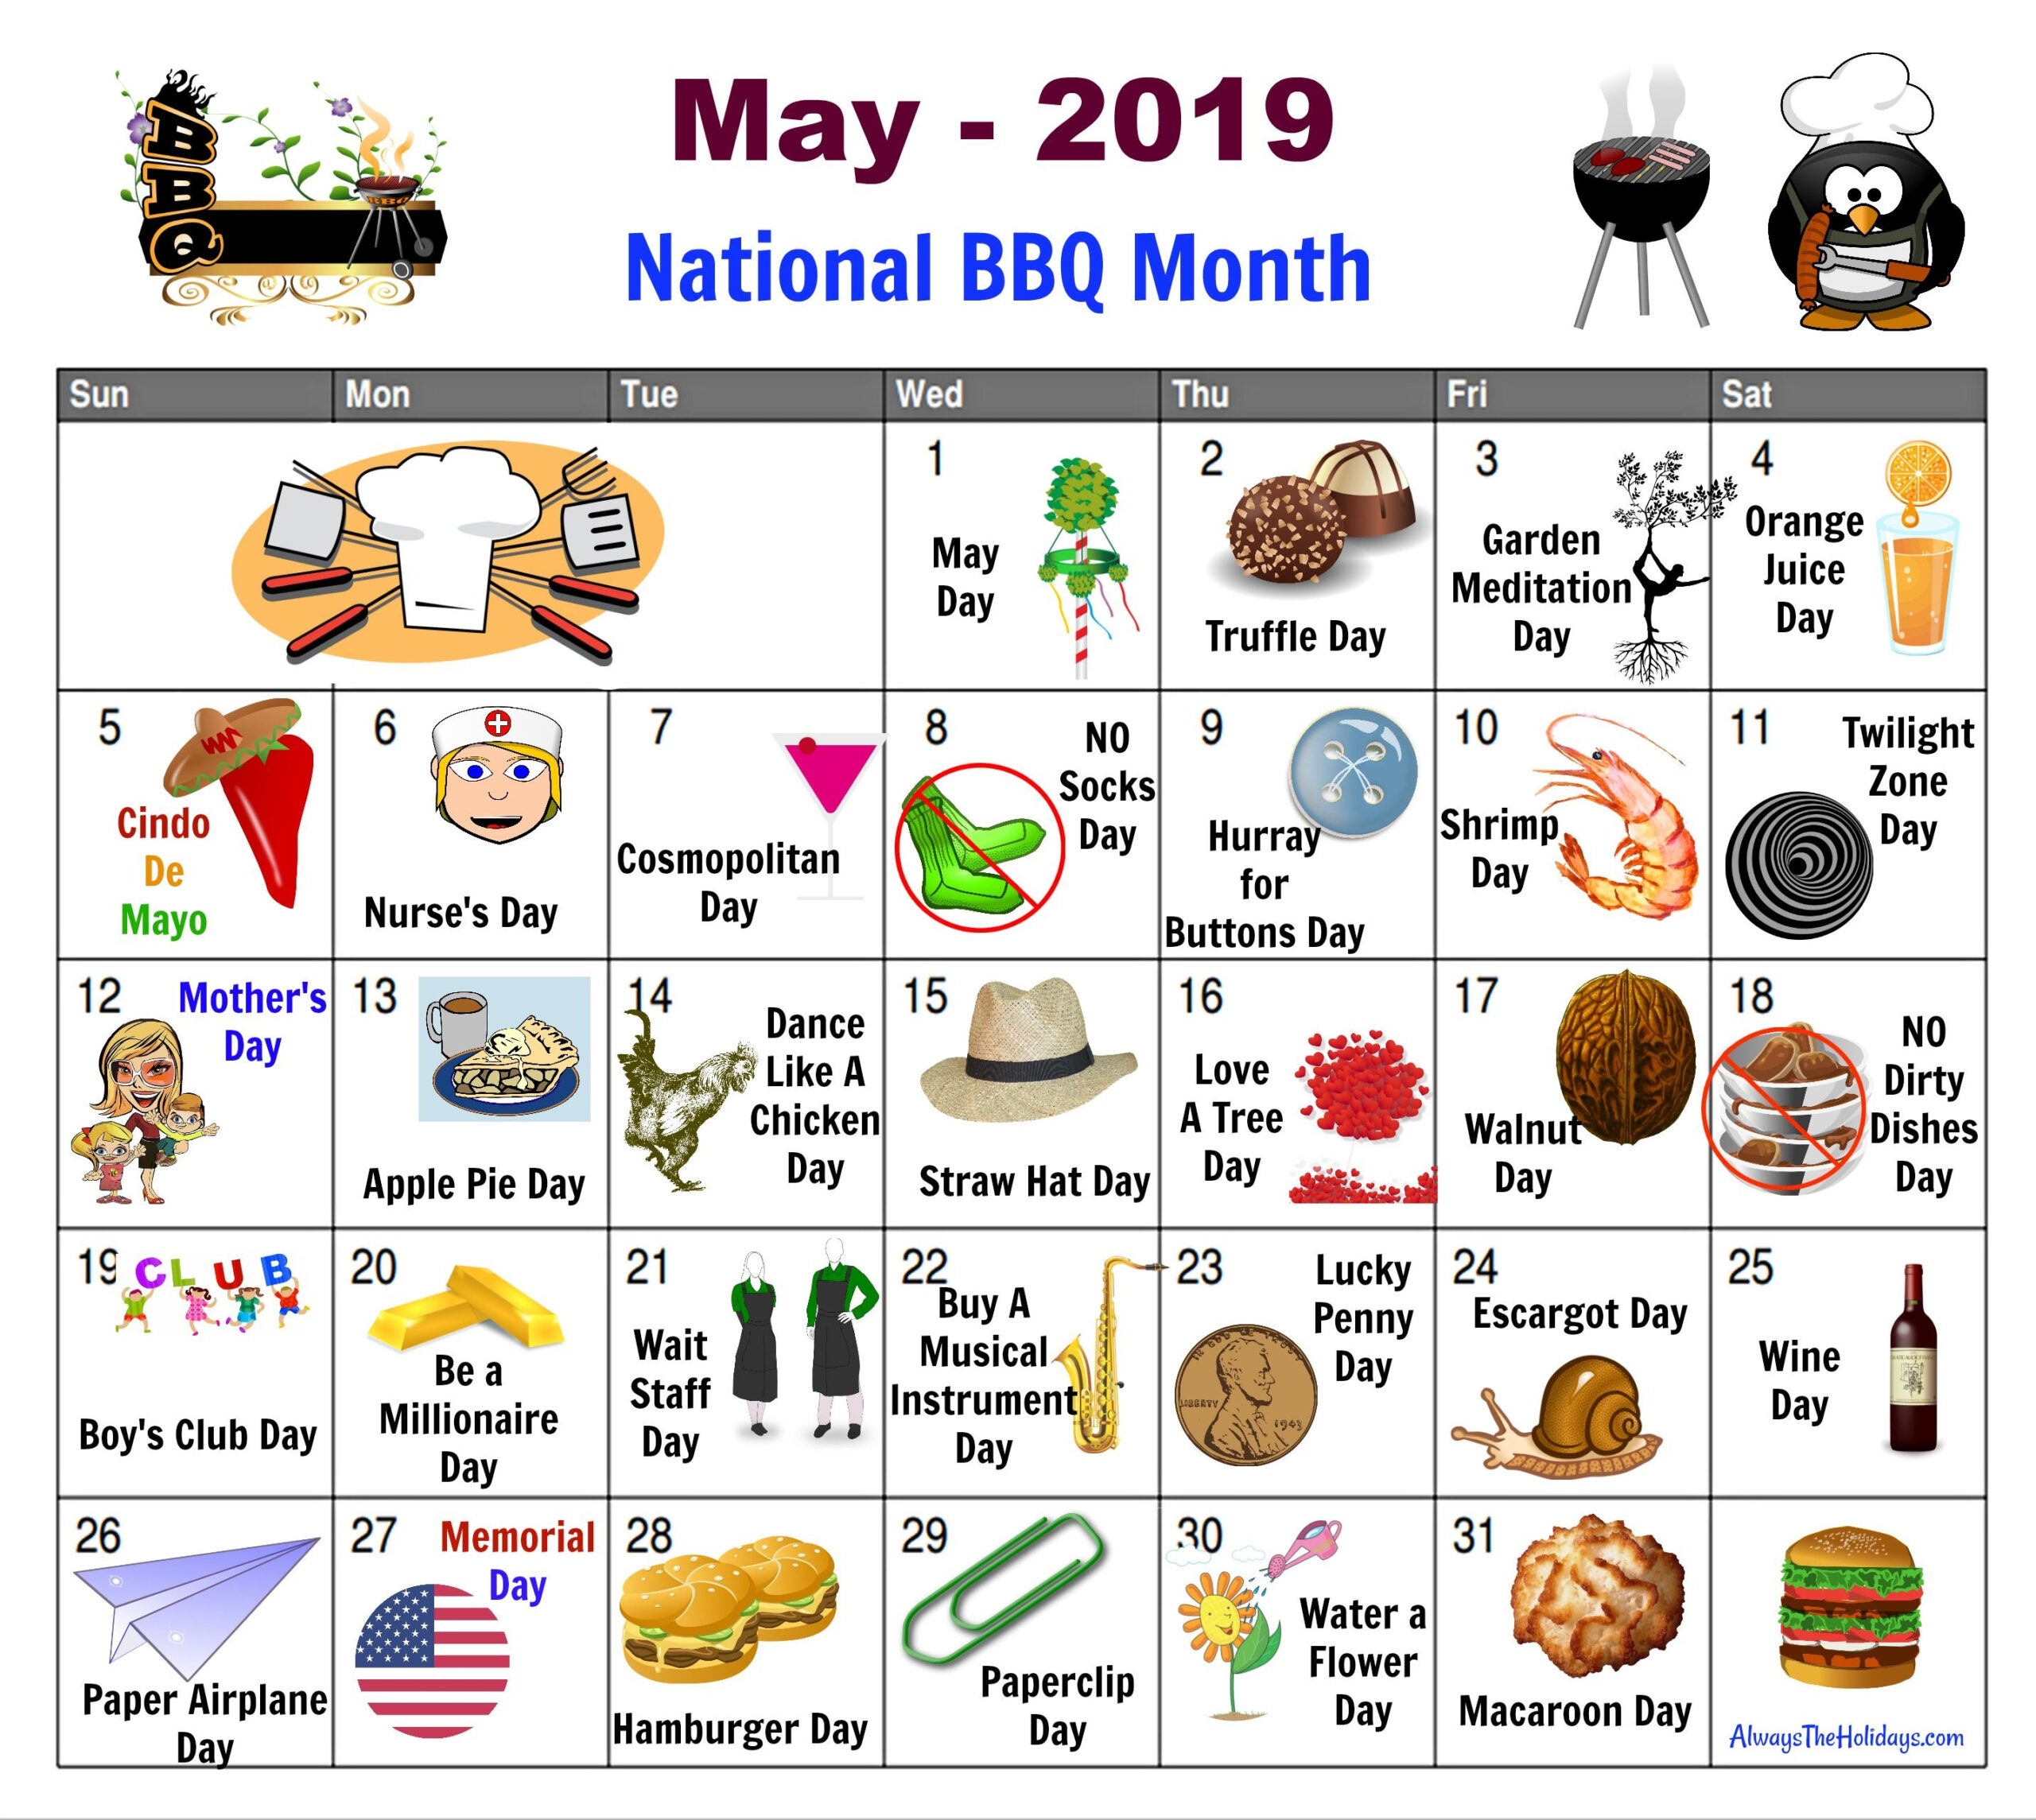 May National Days Calendar - Free Printable. Find Out All